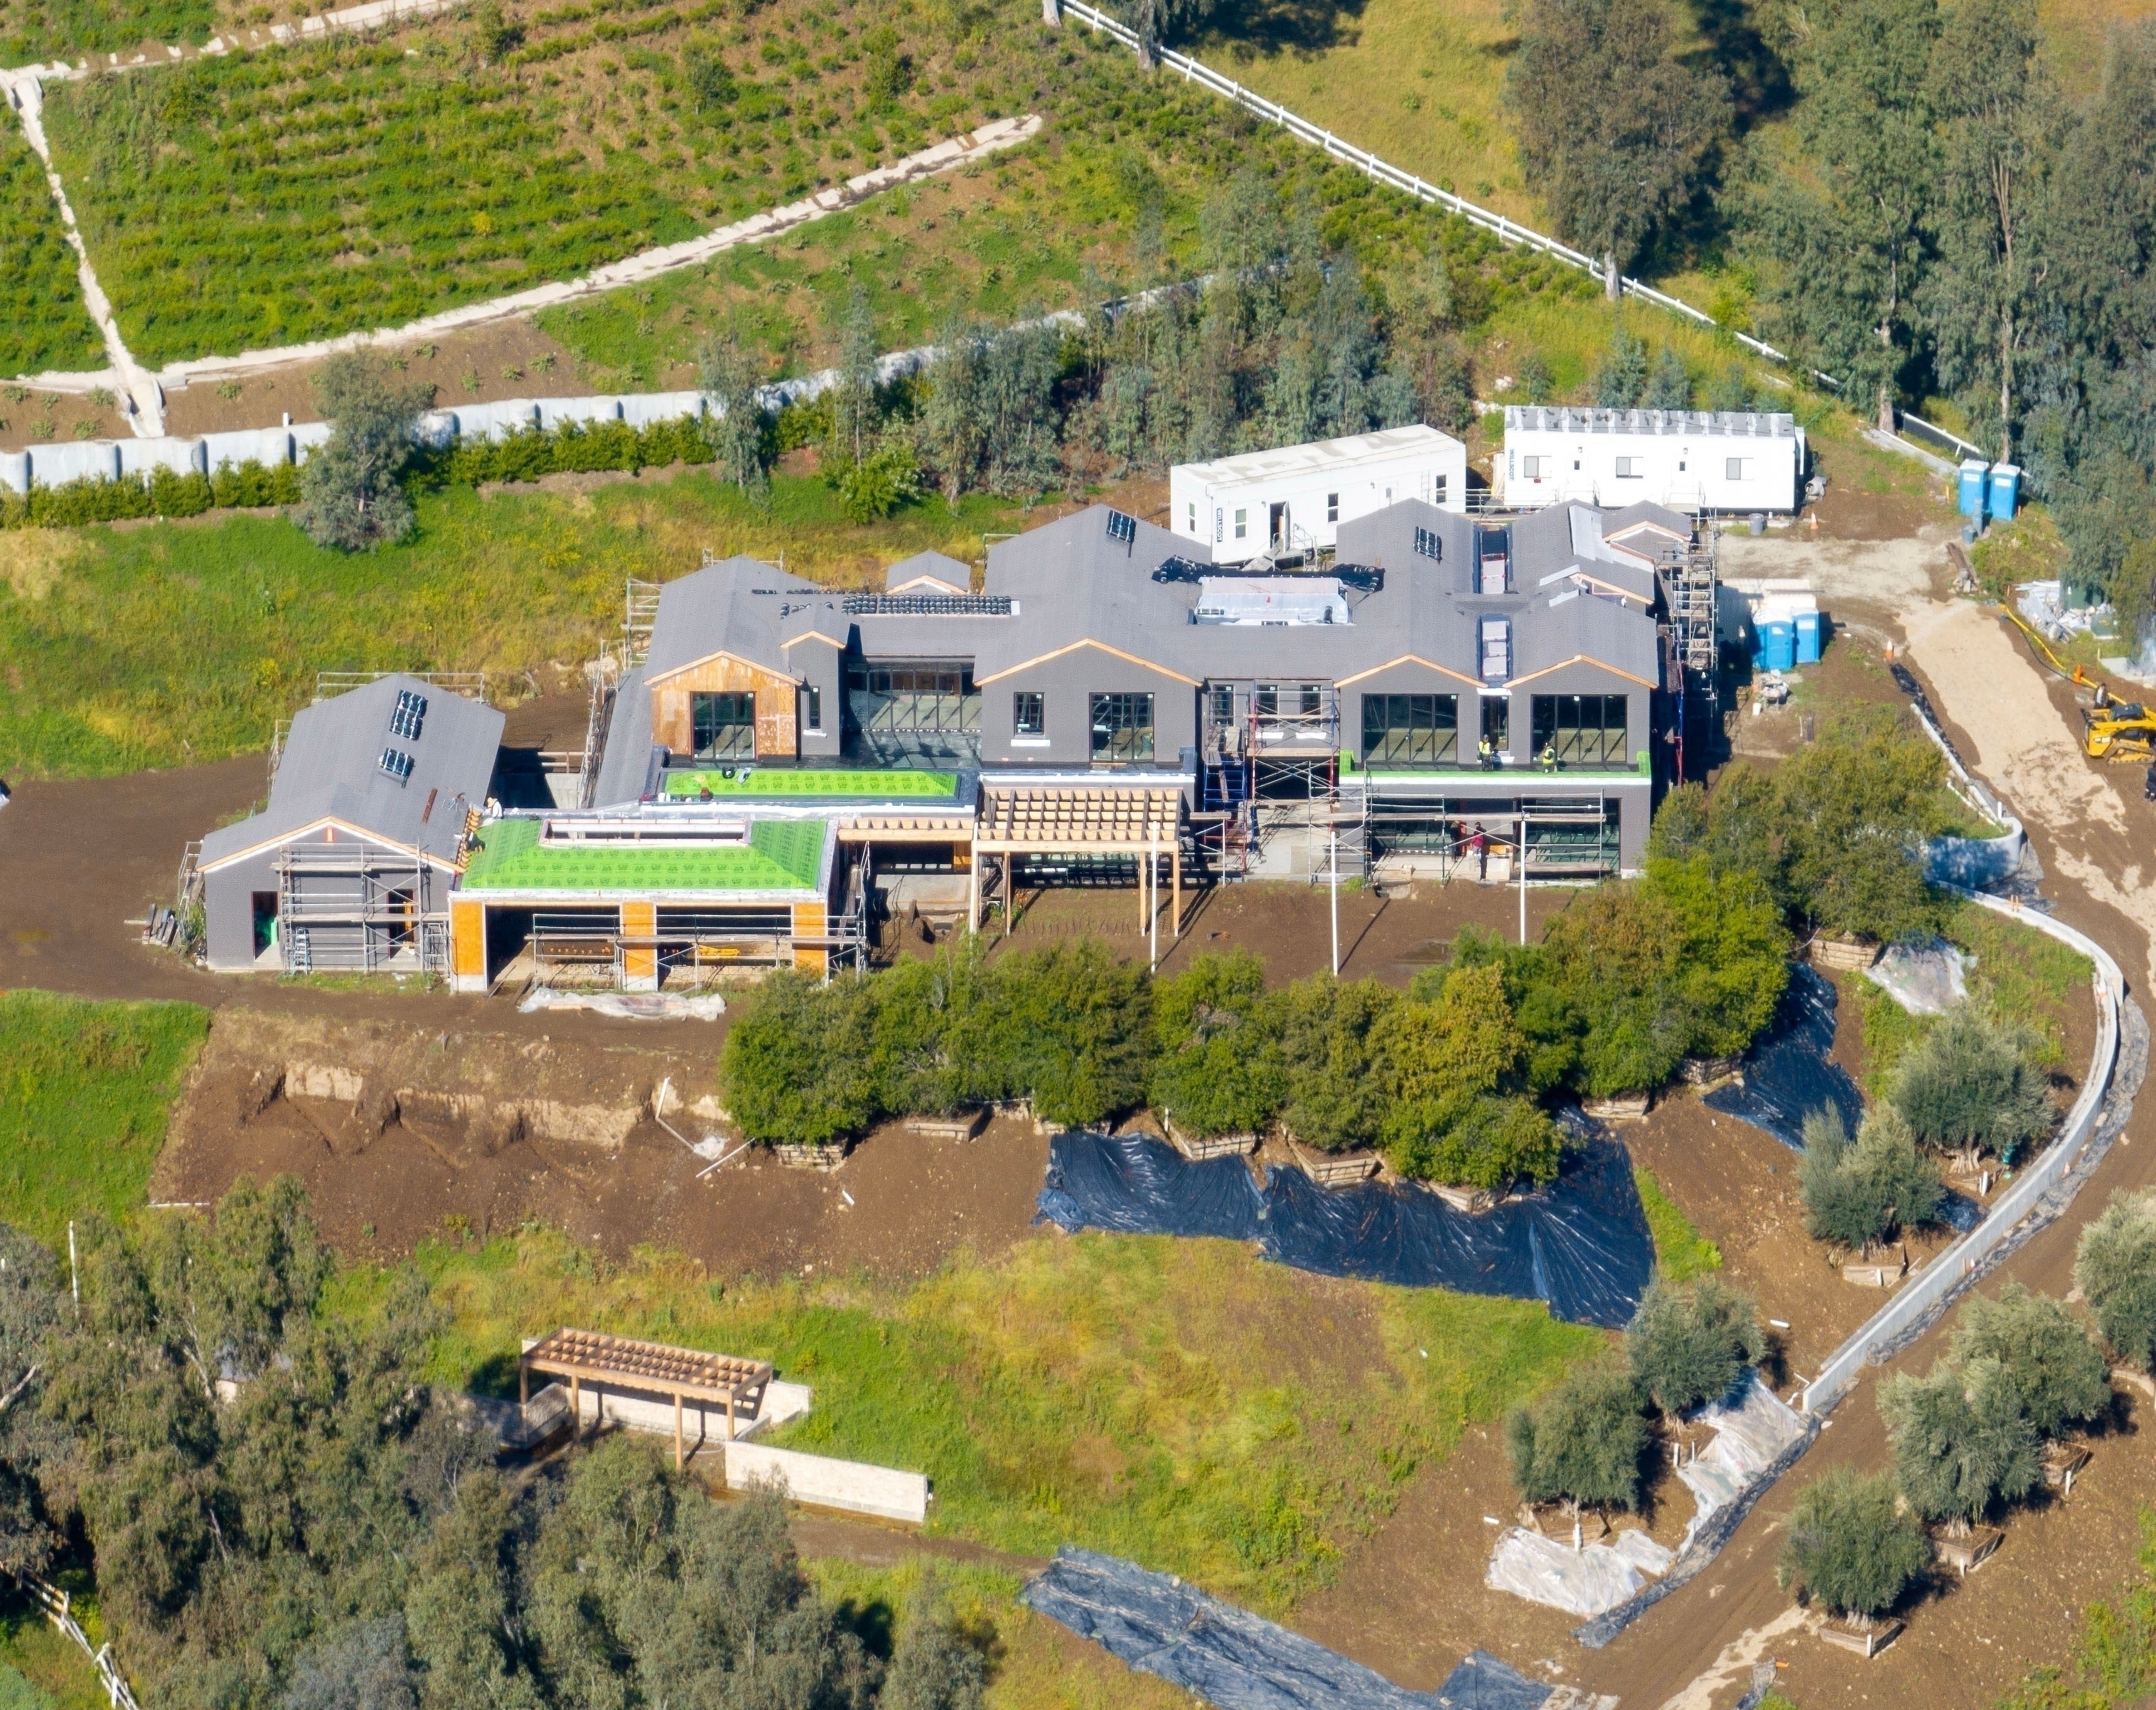 Kylie's future home is located in Hidden Hills in Los Angeles